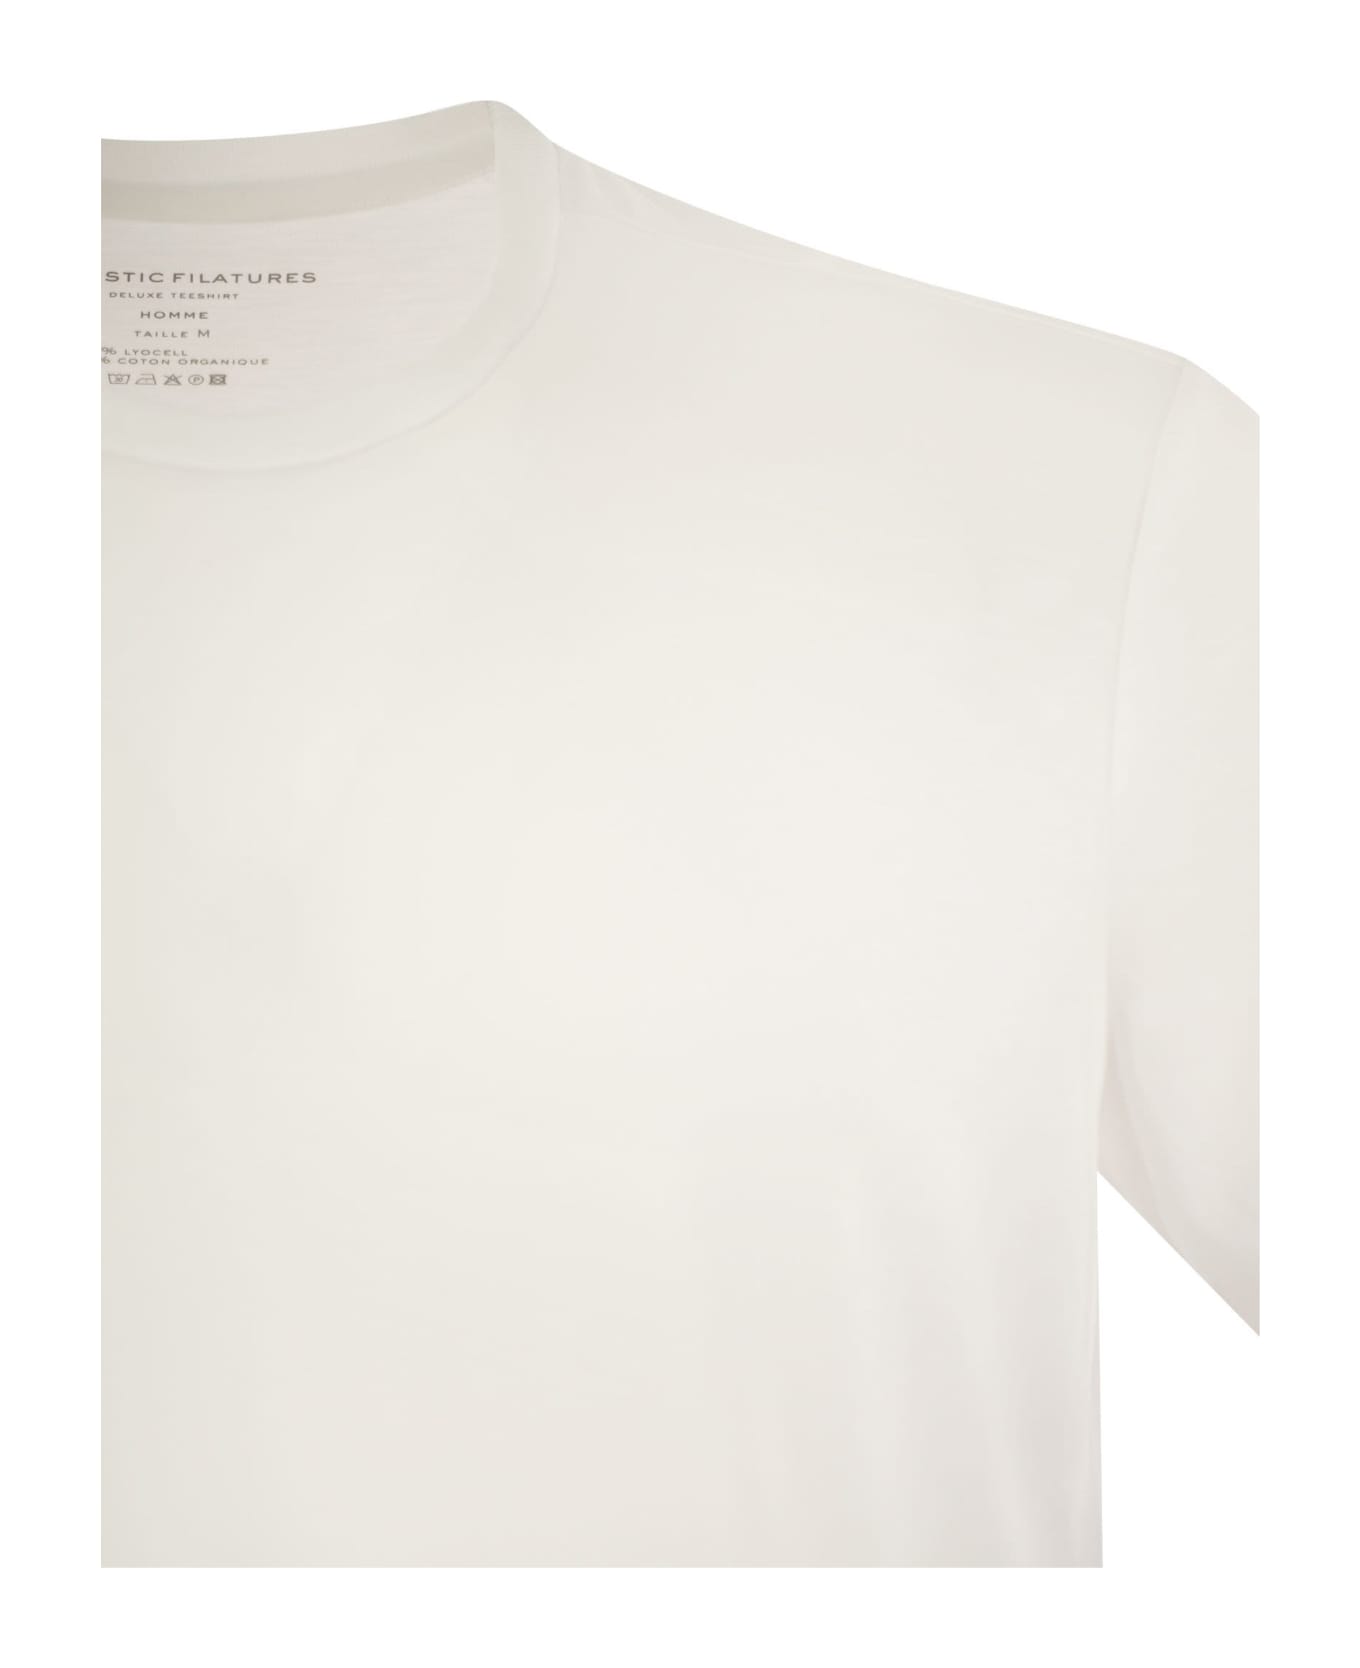 Majestic Filatures Short-sleeved T-shirt In Lyocell And Cotton - Bianco シャツ